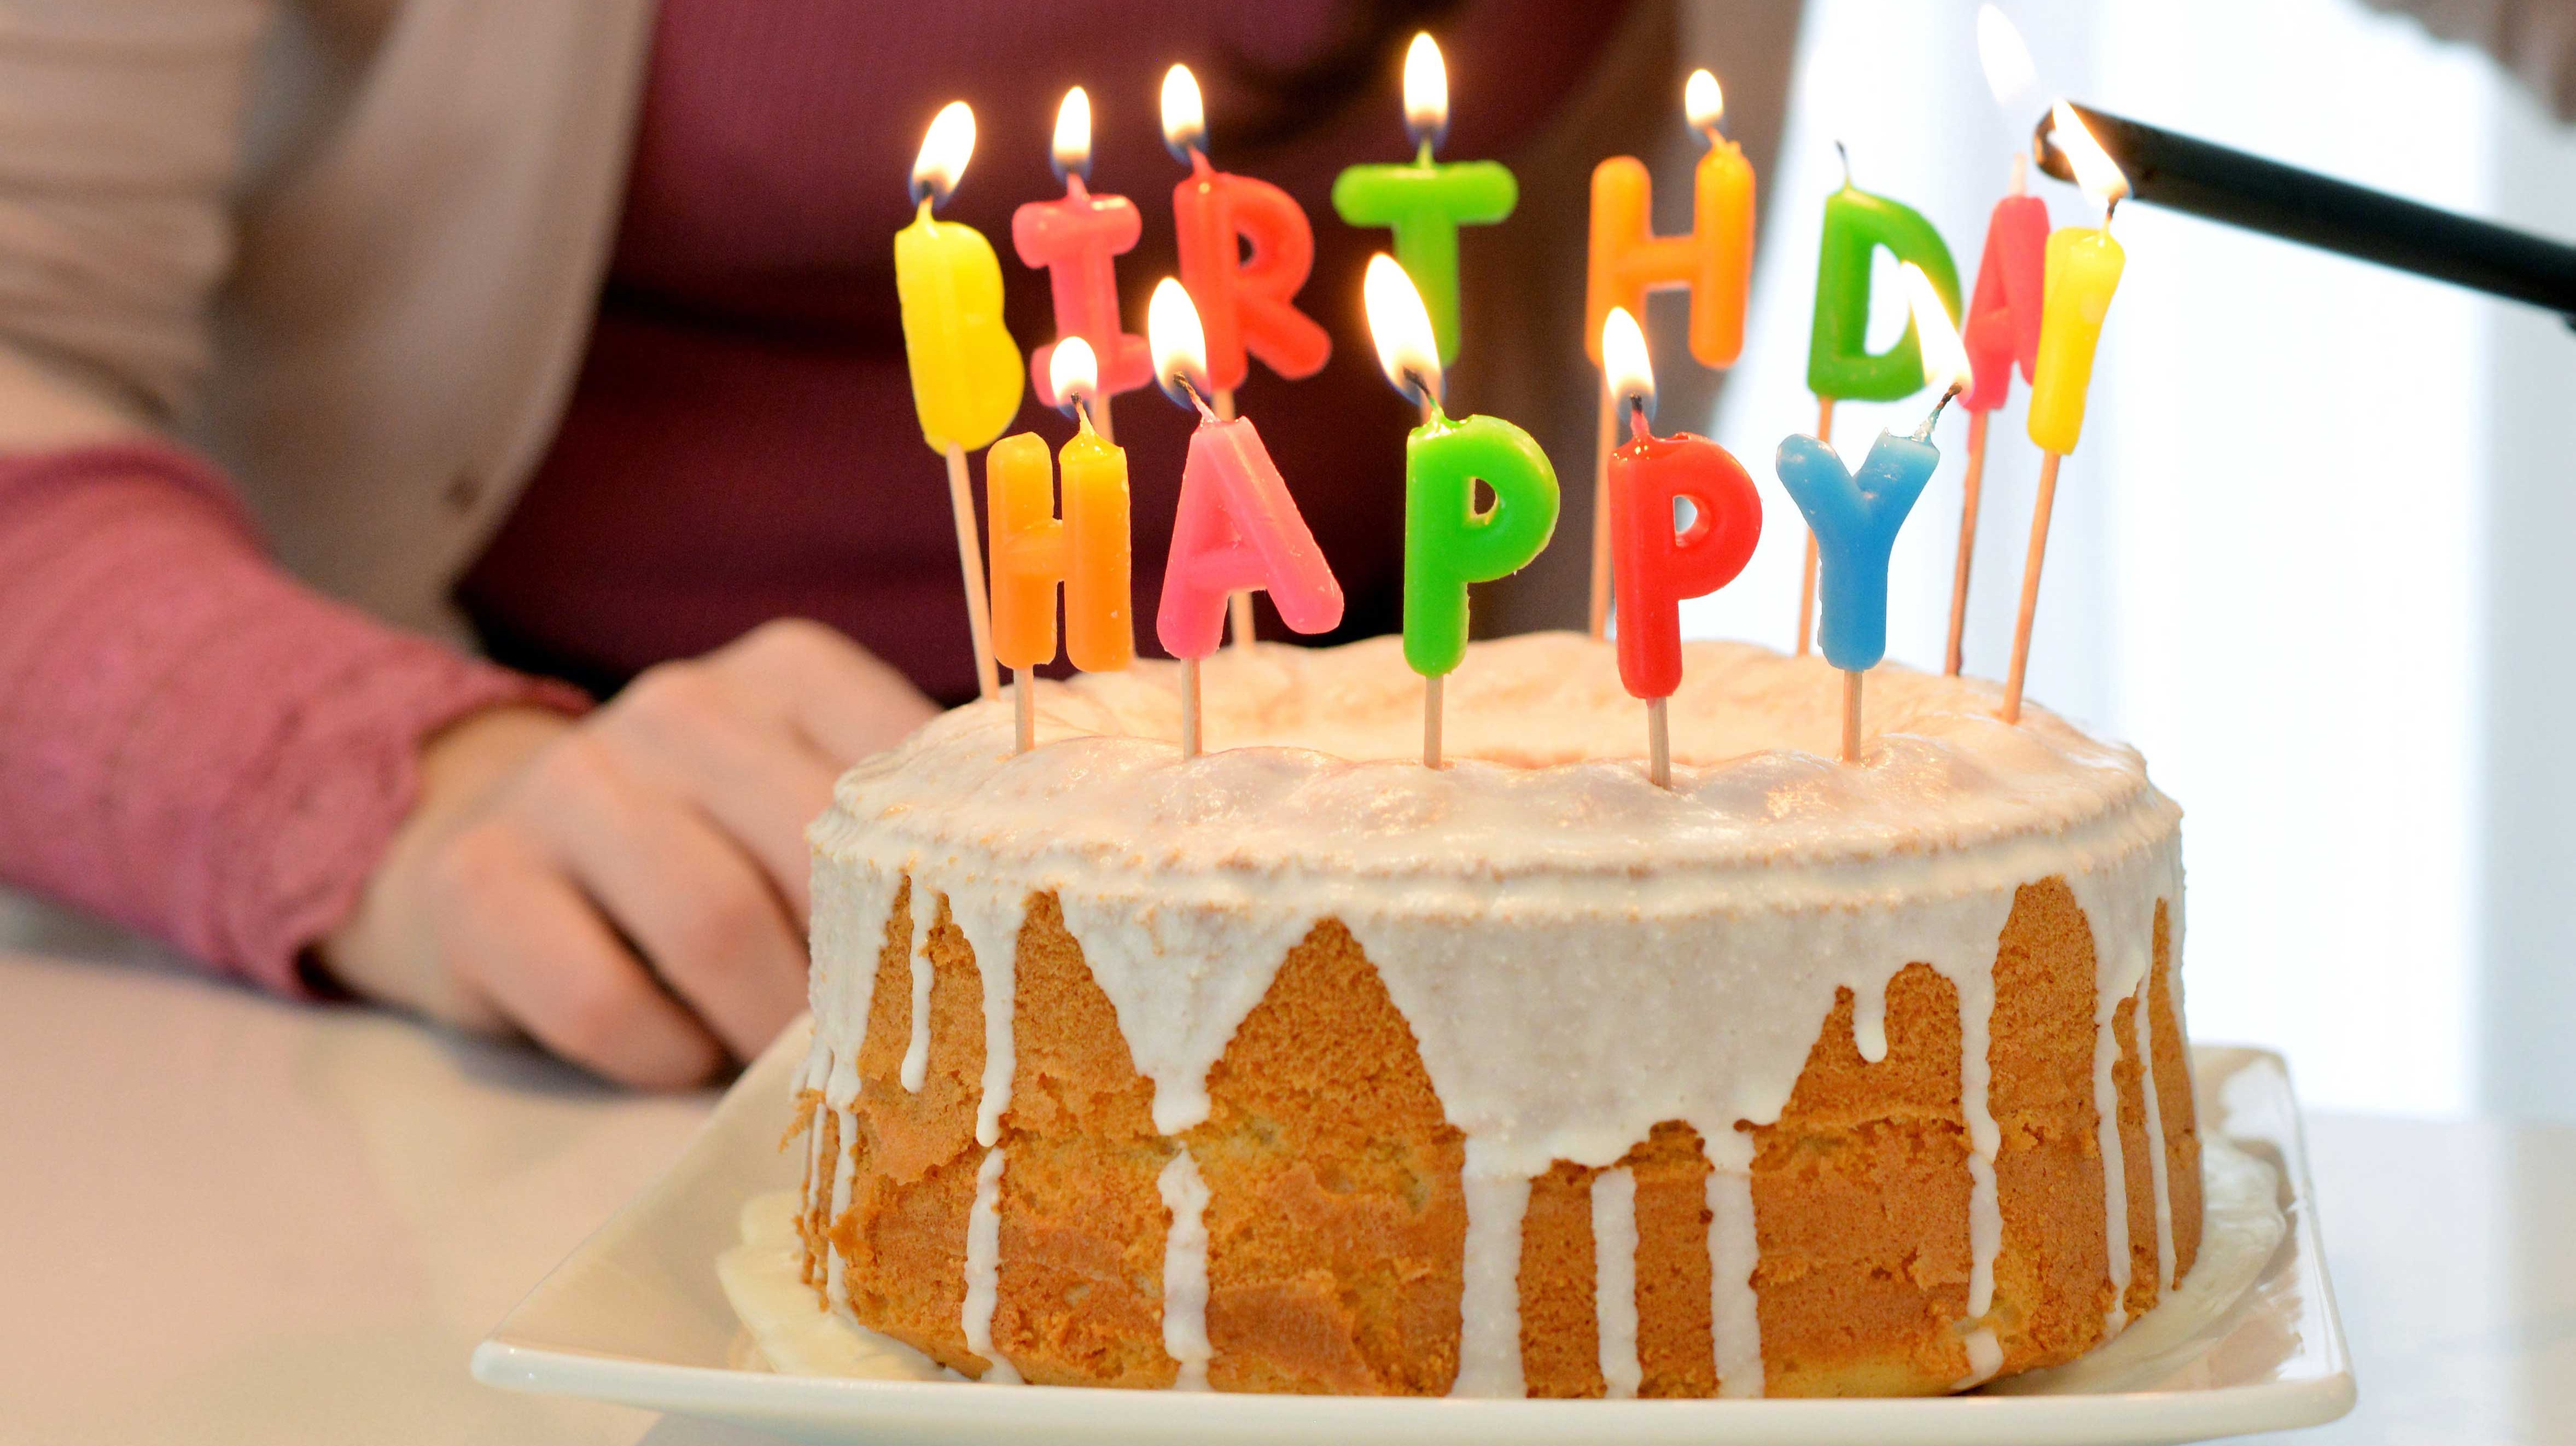 Primary School Bans Birthday Cakes In Class Over Allergy Fears Itv 2239